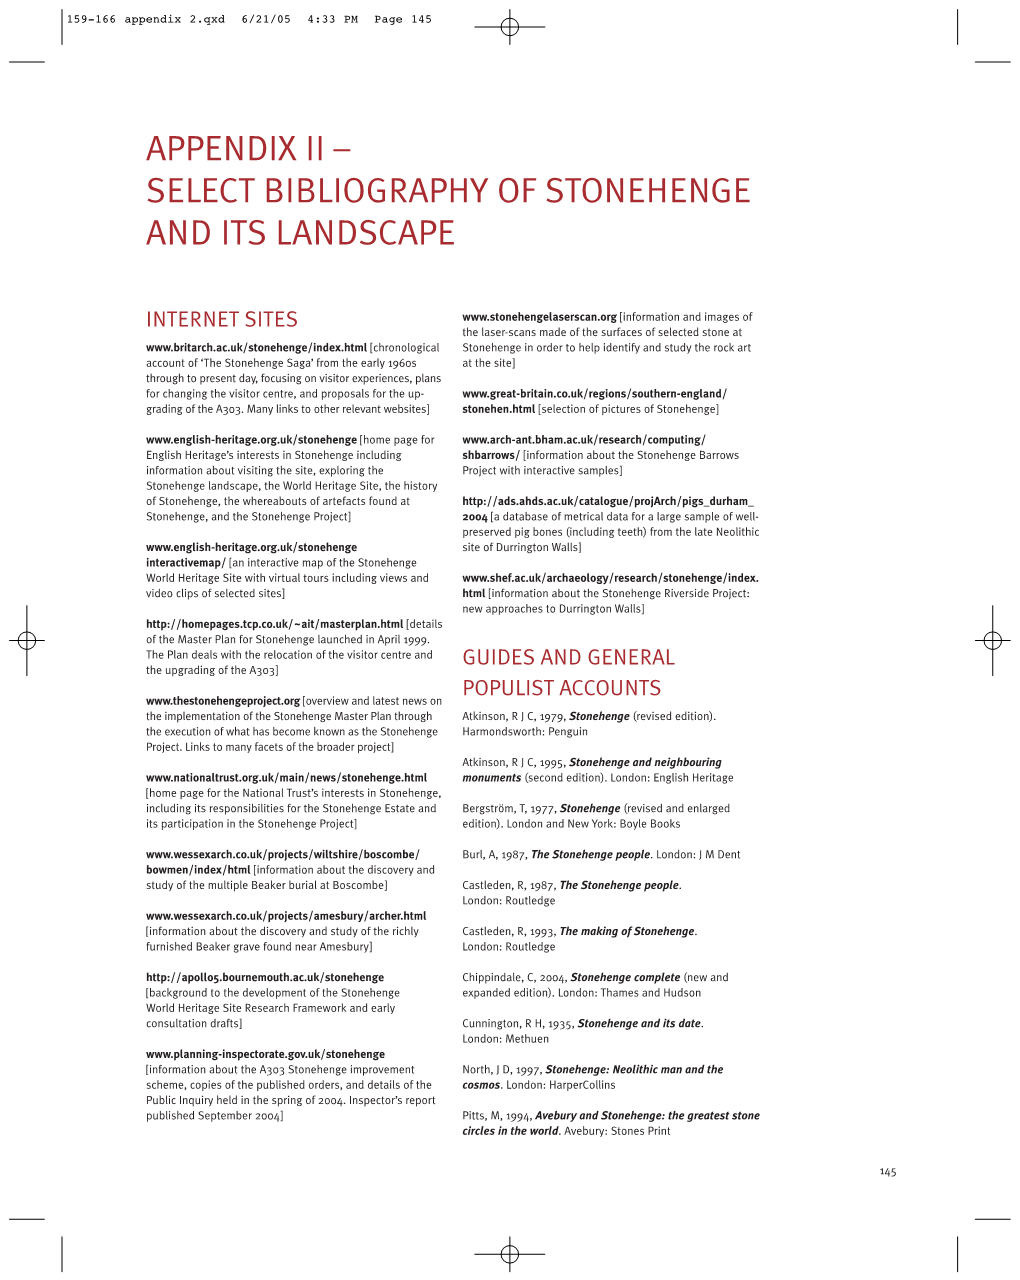 Appendix Ii – Select Bibliography of Stonehenge and Its Landscape